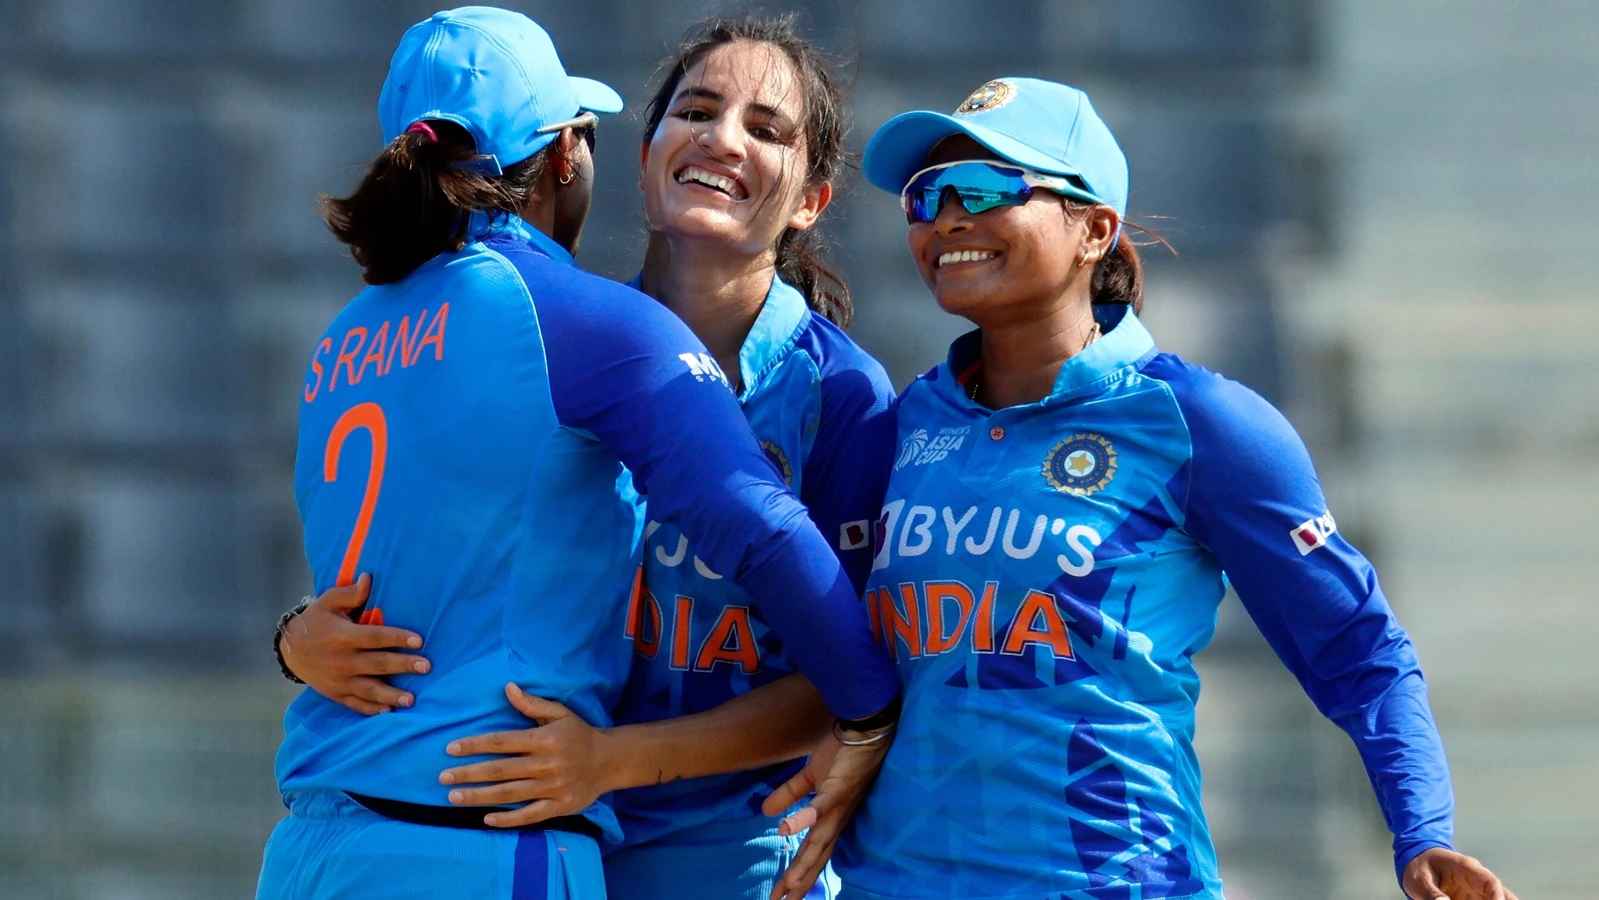 India A women defeated Bangladesh A women to claim the title in the final of the Women's Emerging Asia Cup